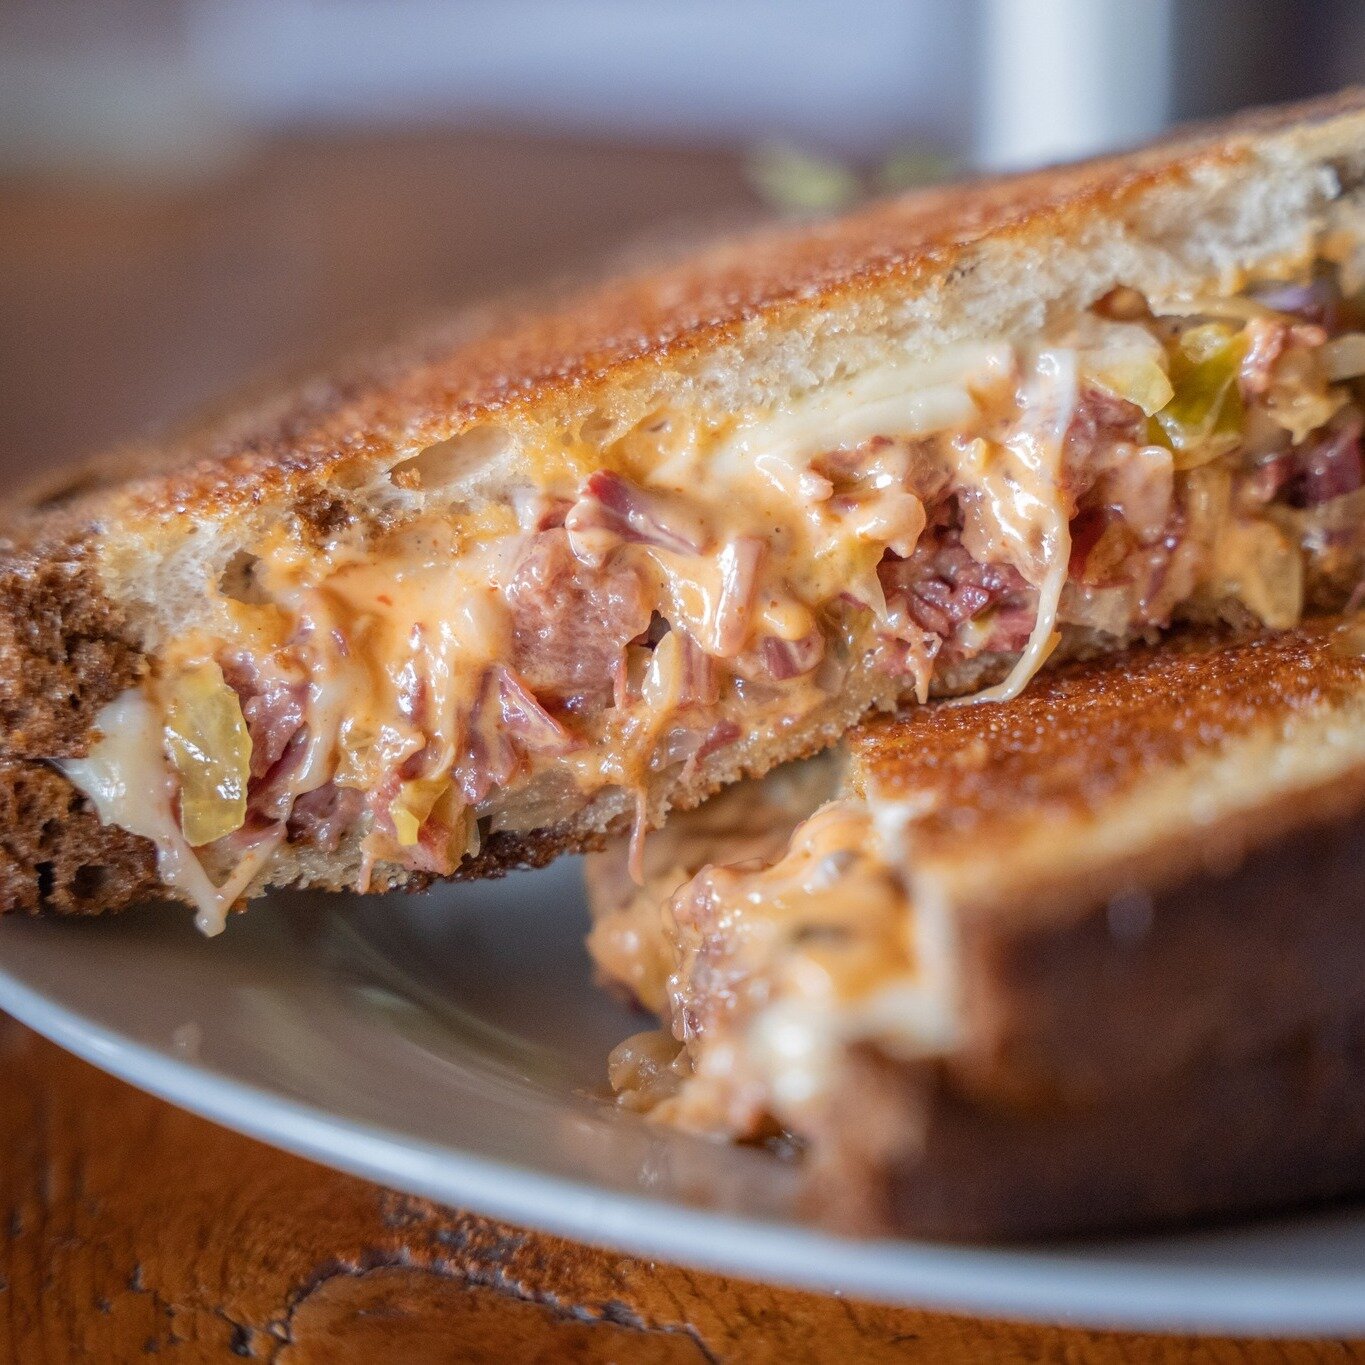 Our Reuben Sandwich is here to steal your heart! Melty, saucy, and tangy, it's the type of sandwich you won't forget! 
#pipelinecrafttapsandkitchen #pipelinecrafttaps #pipelinemtshasta #mtshastaeats #visitmtshasta #seesiskiyou  #craftbeer #reuben